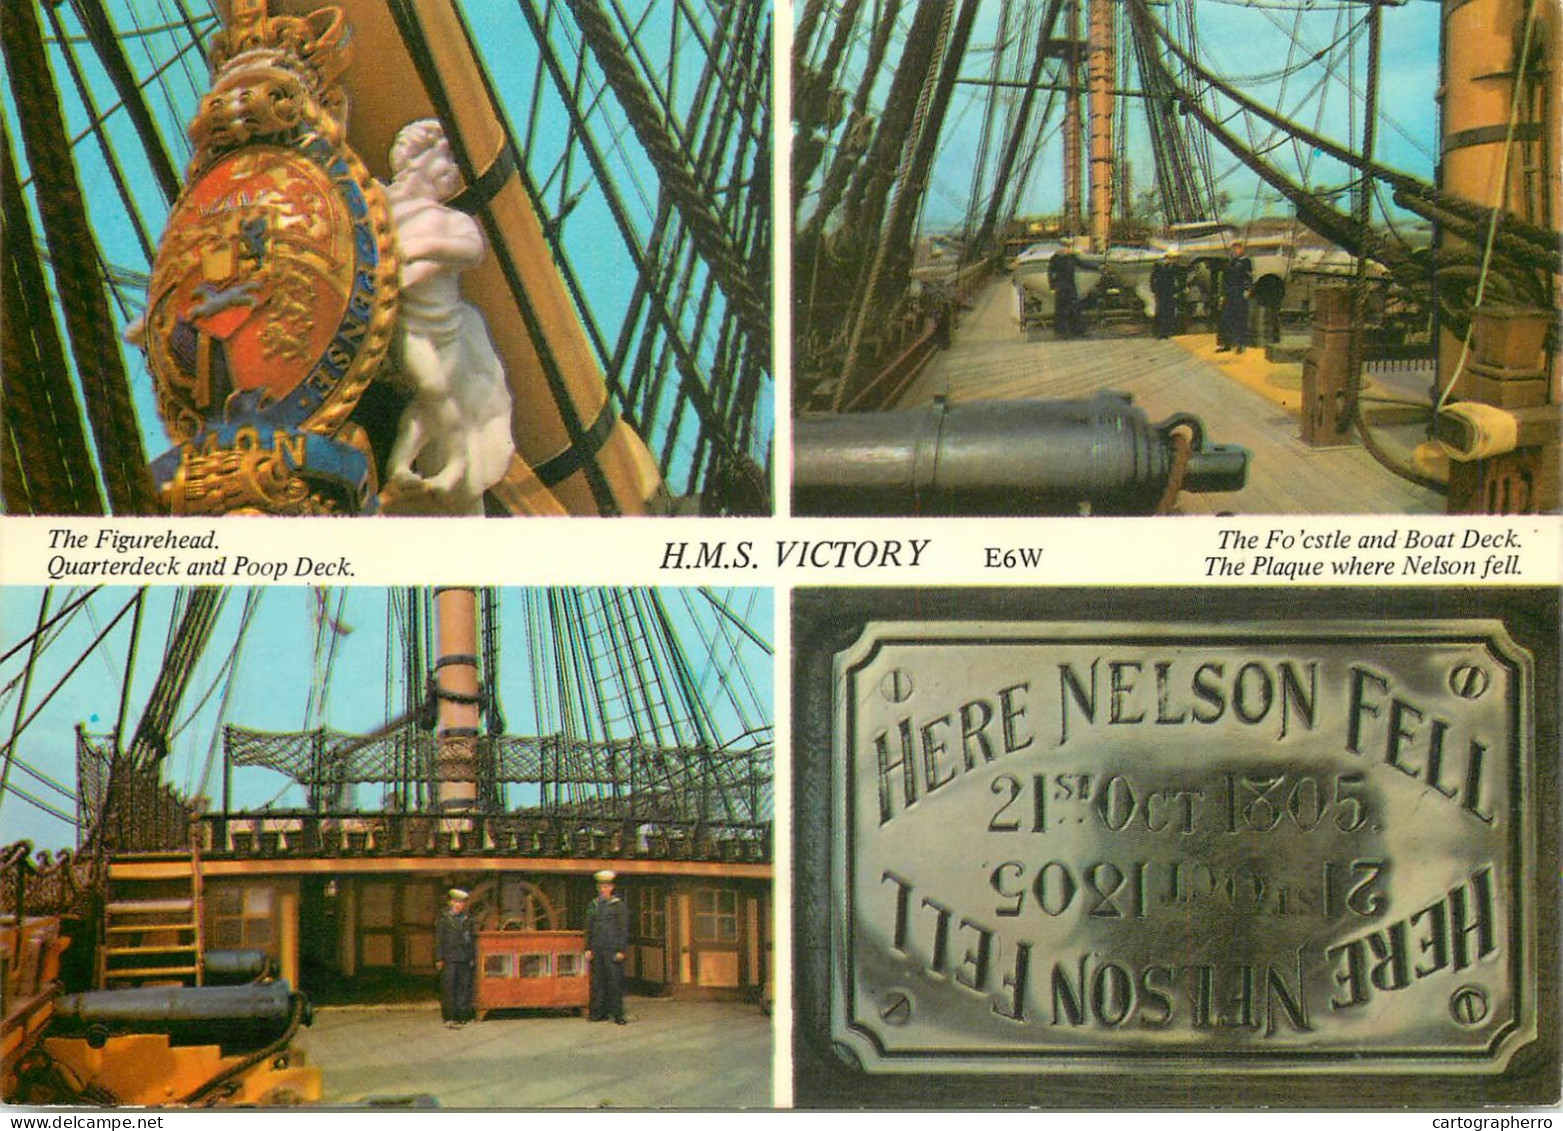 Navigation Sailing Vessels & Boats Themed Postcard H.M.S. Victory - Segelboote